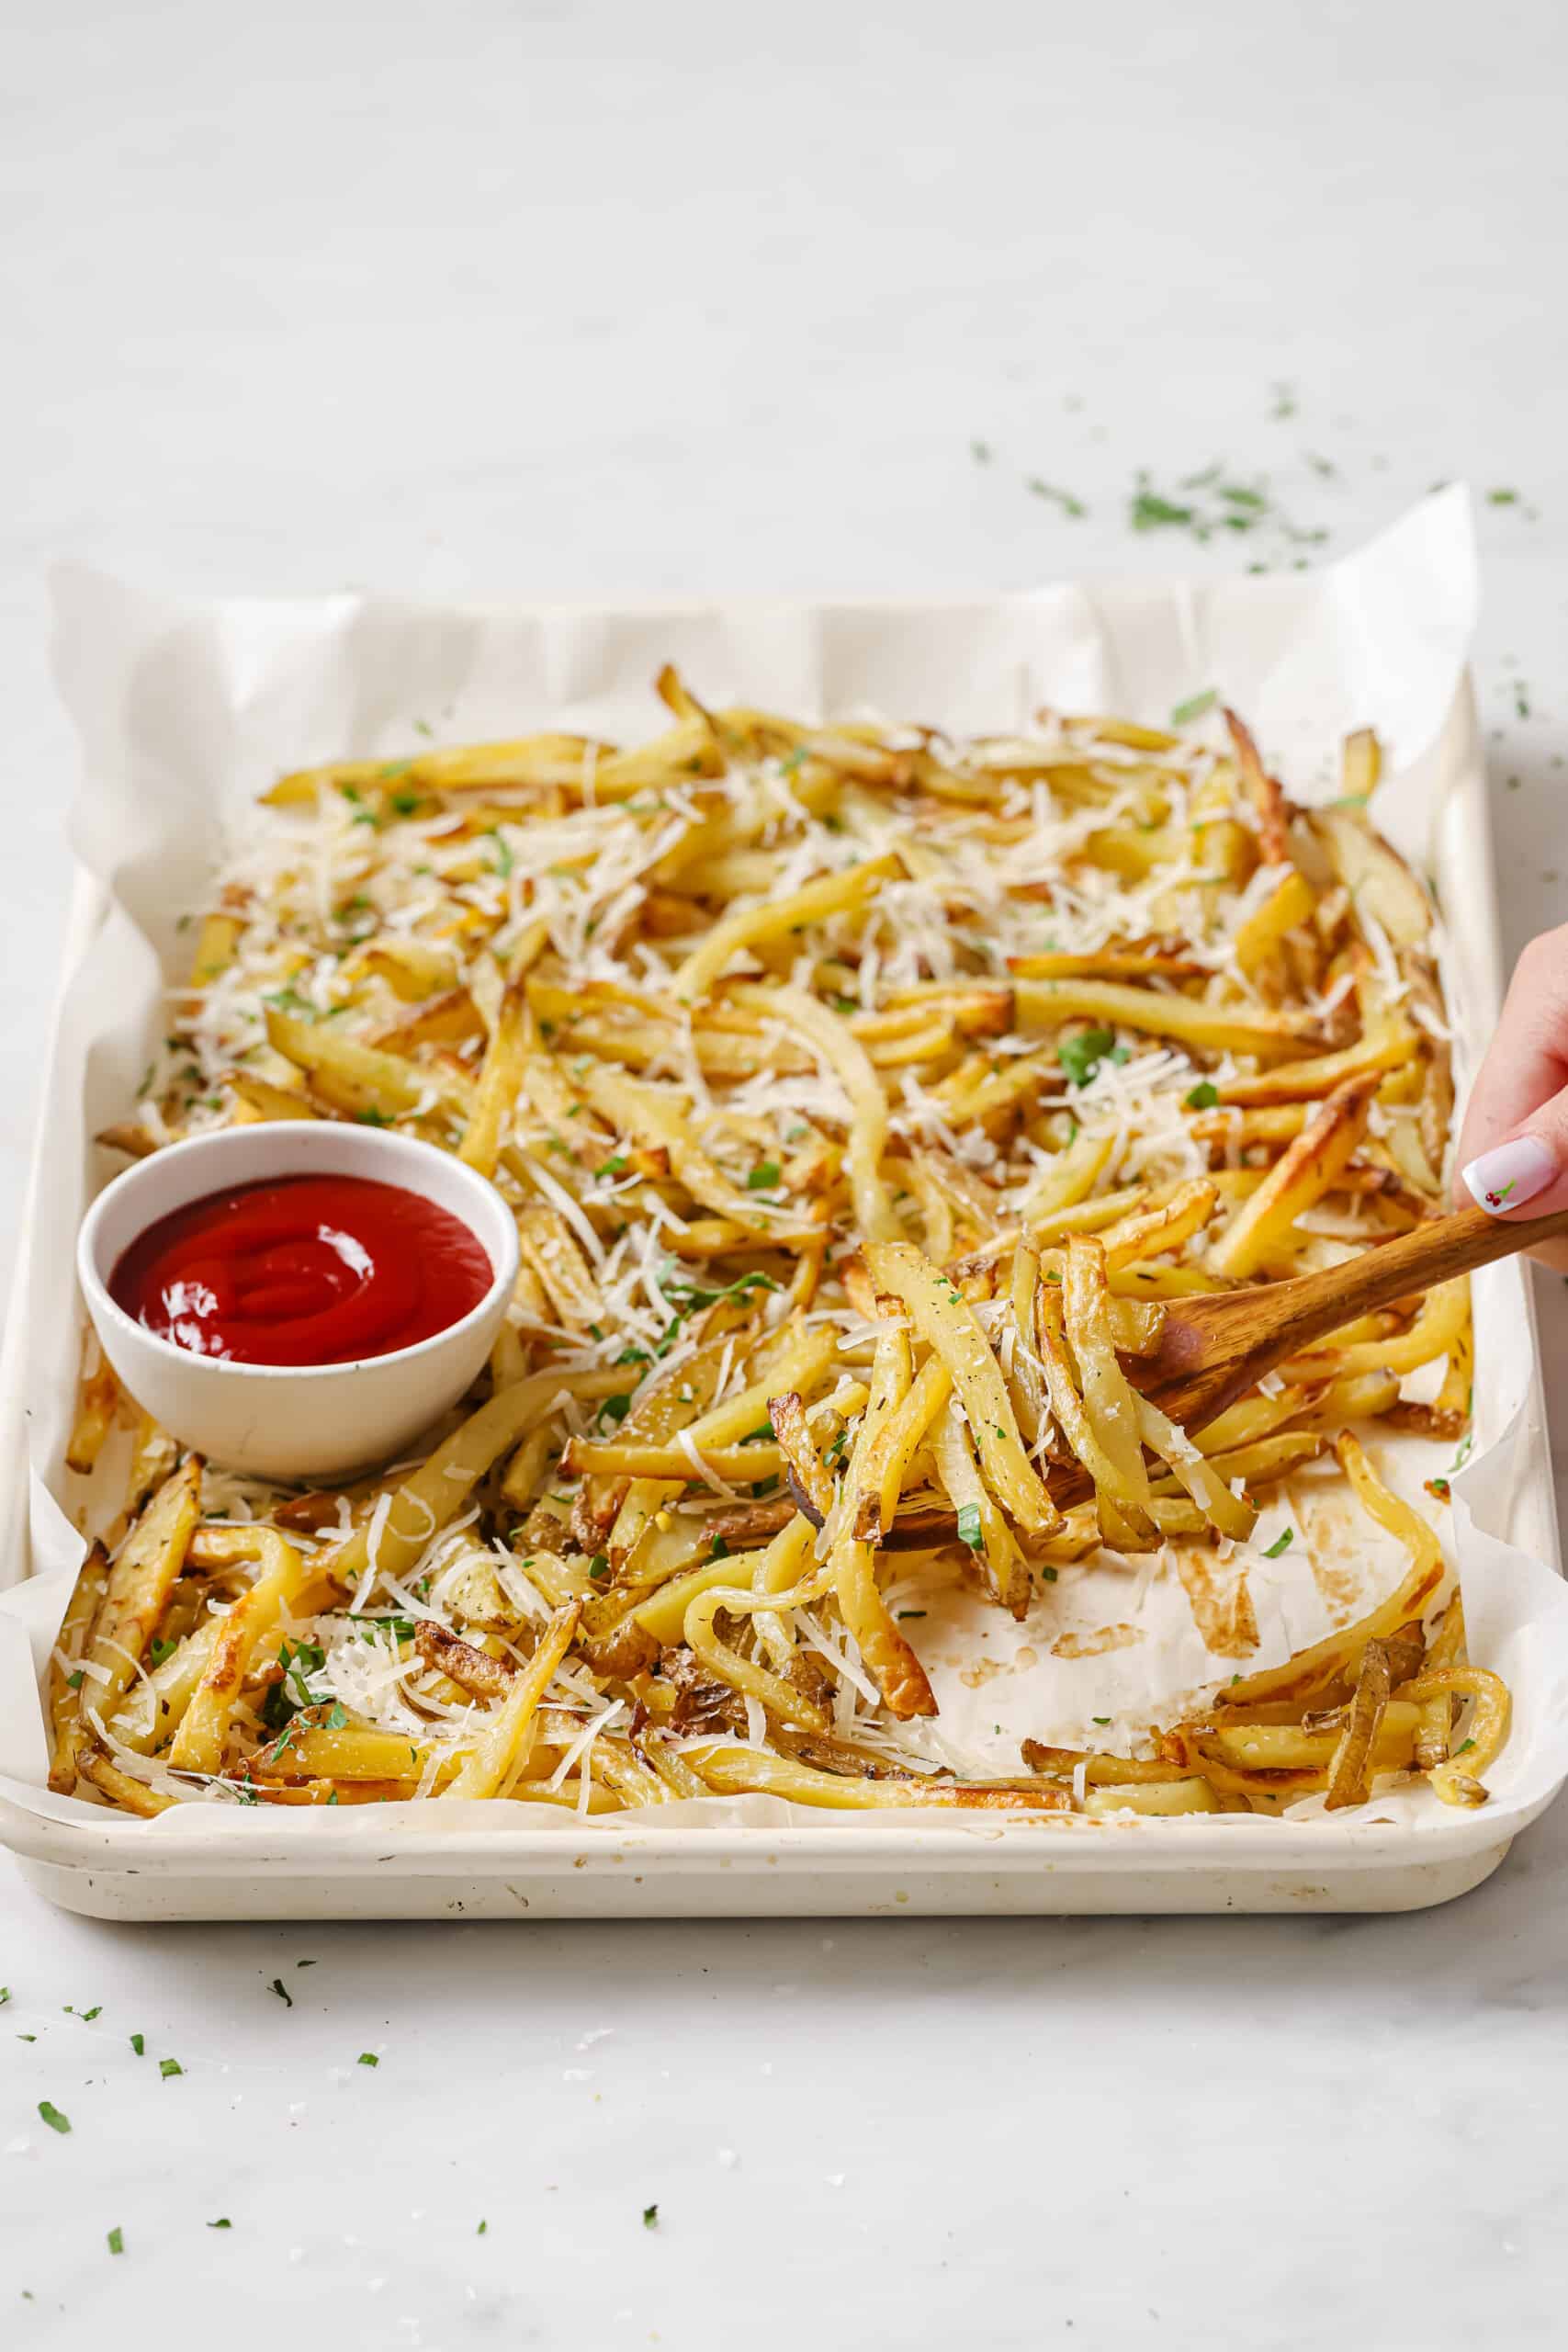 A tray of crispy fries with ketchup on the side. 